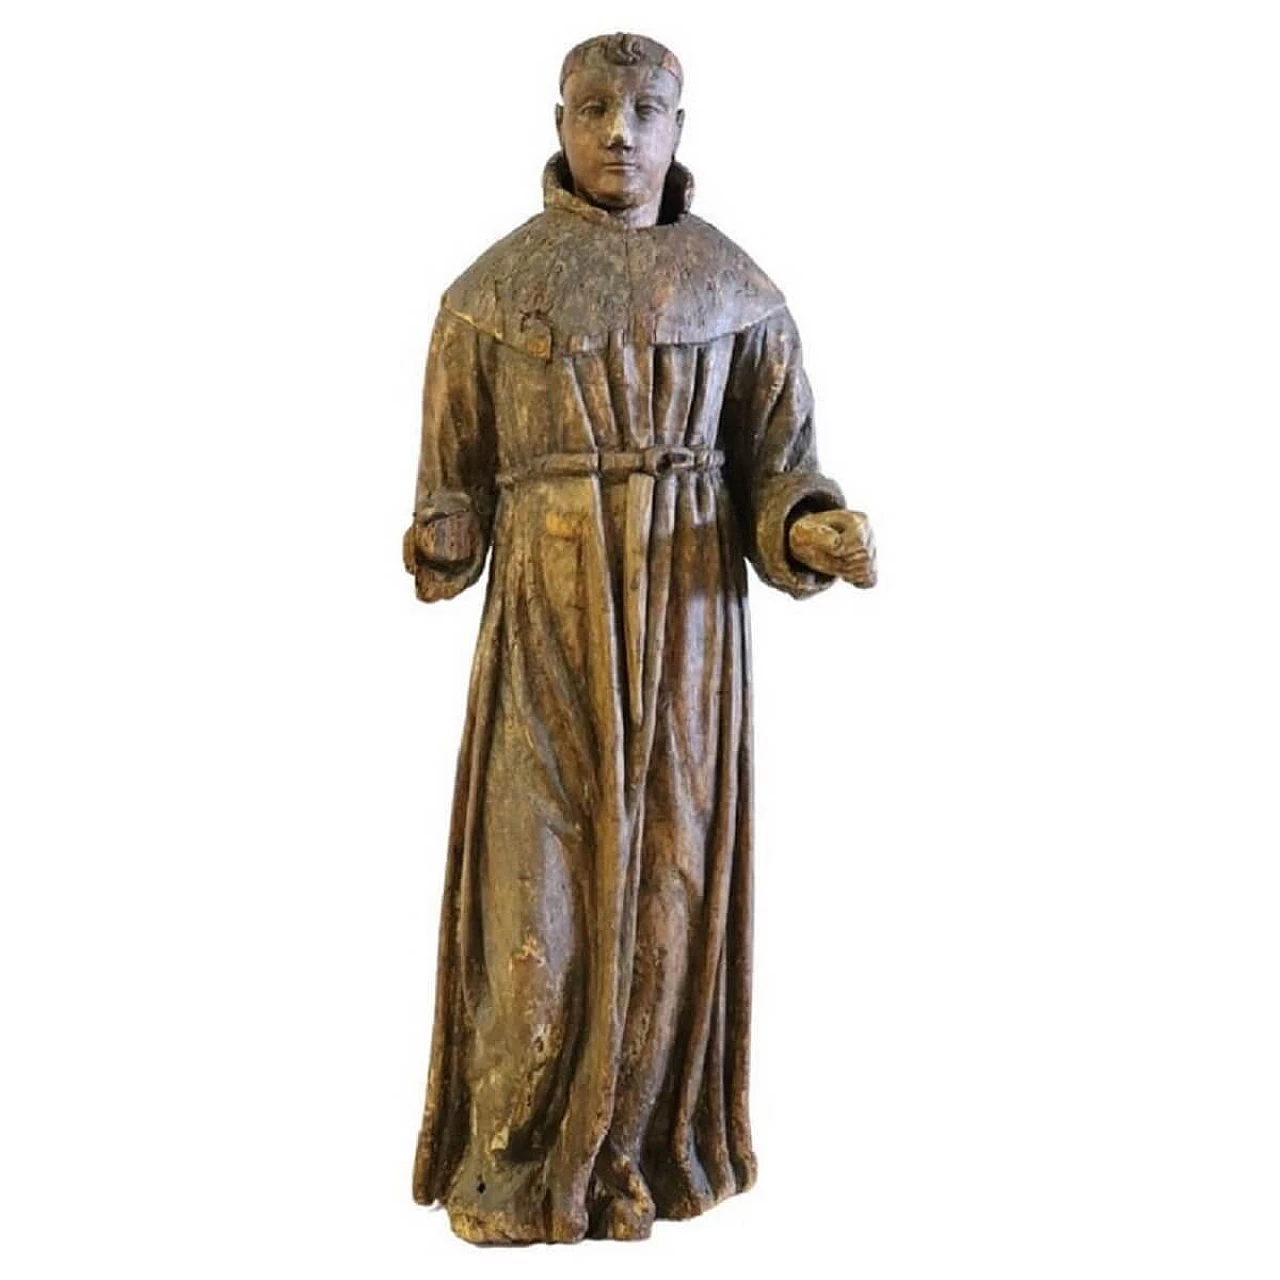 Wooden sculpture depicting St. Francis, 17th century 1